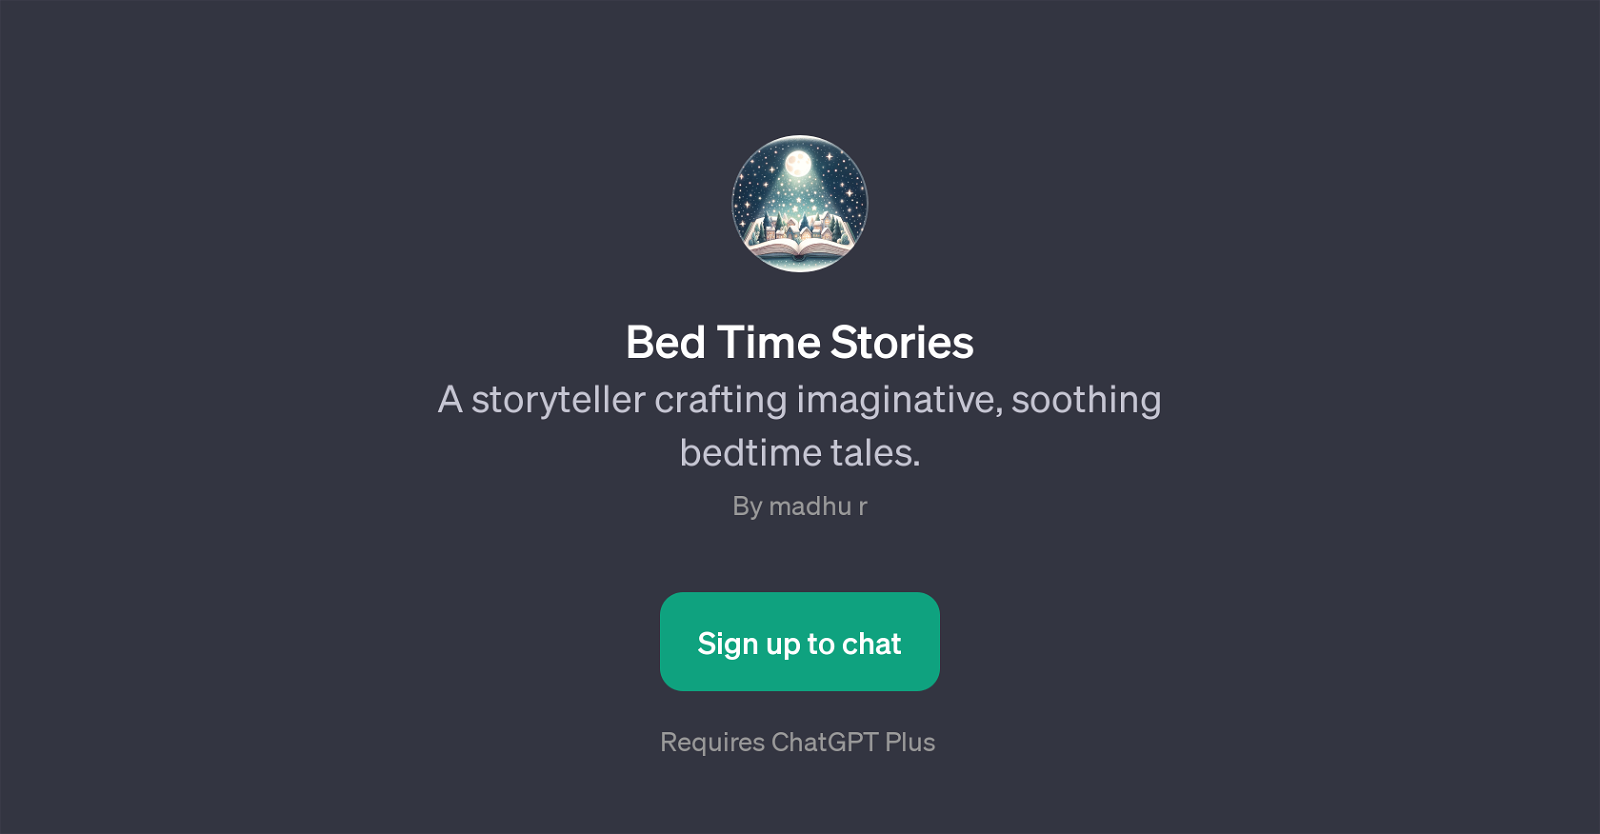 Bed Time Stories website